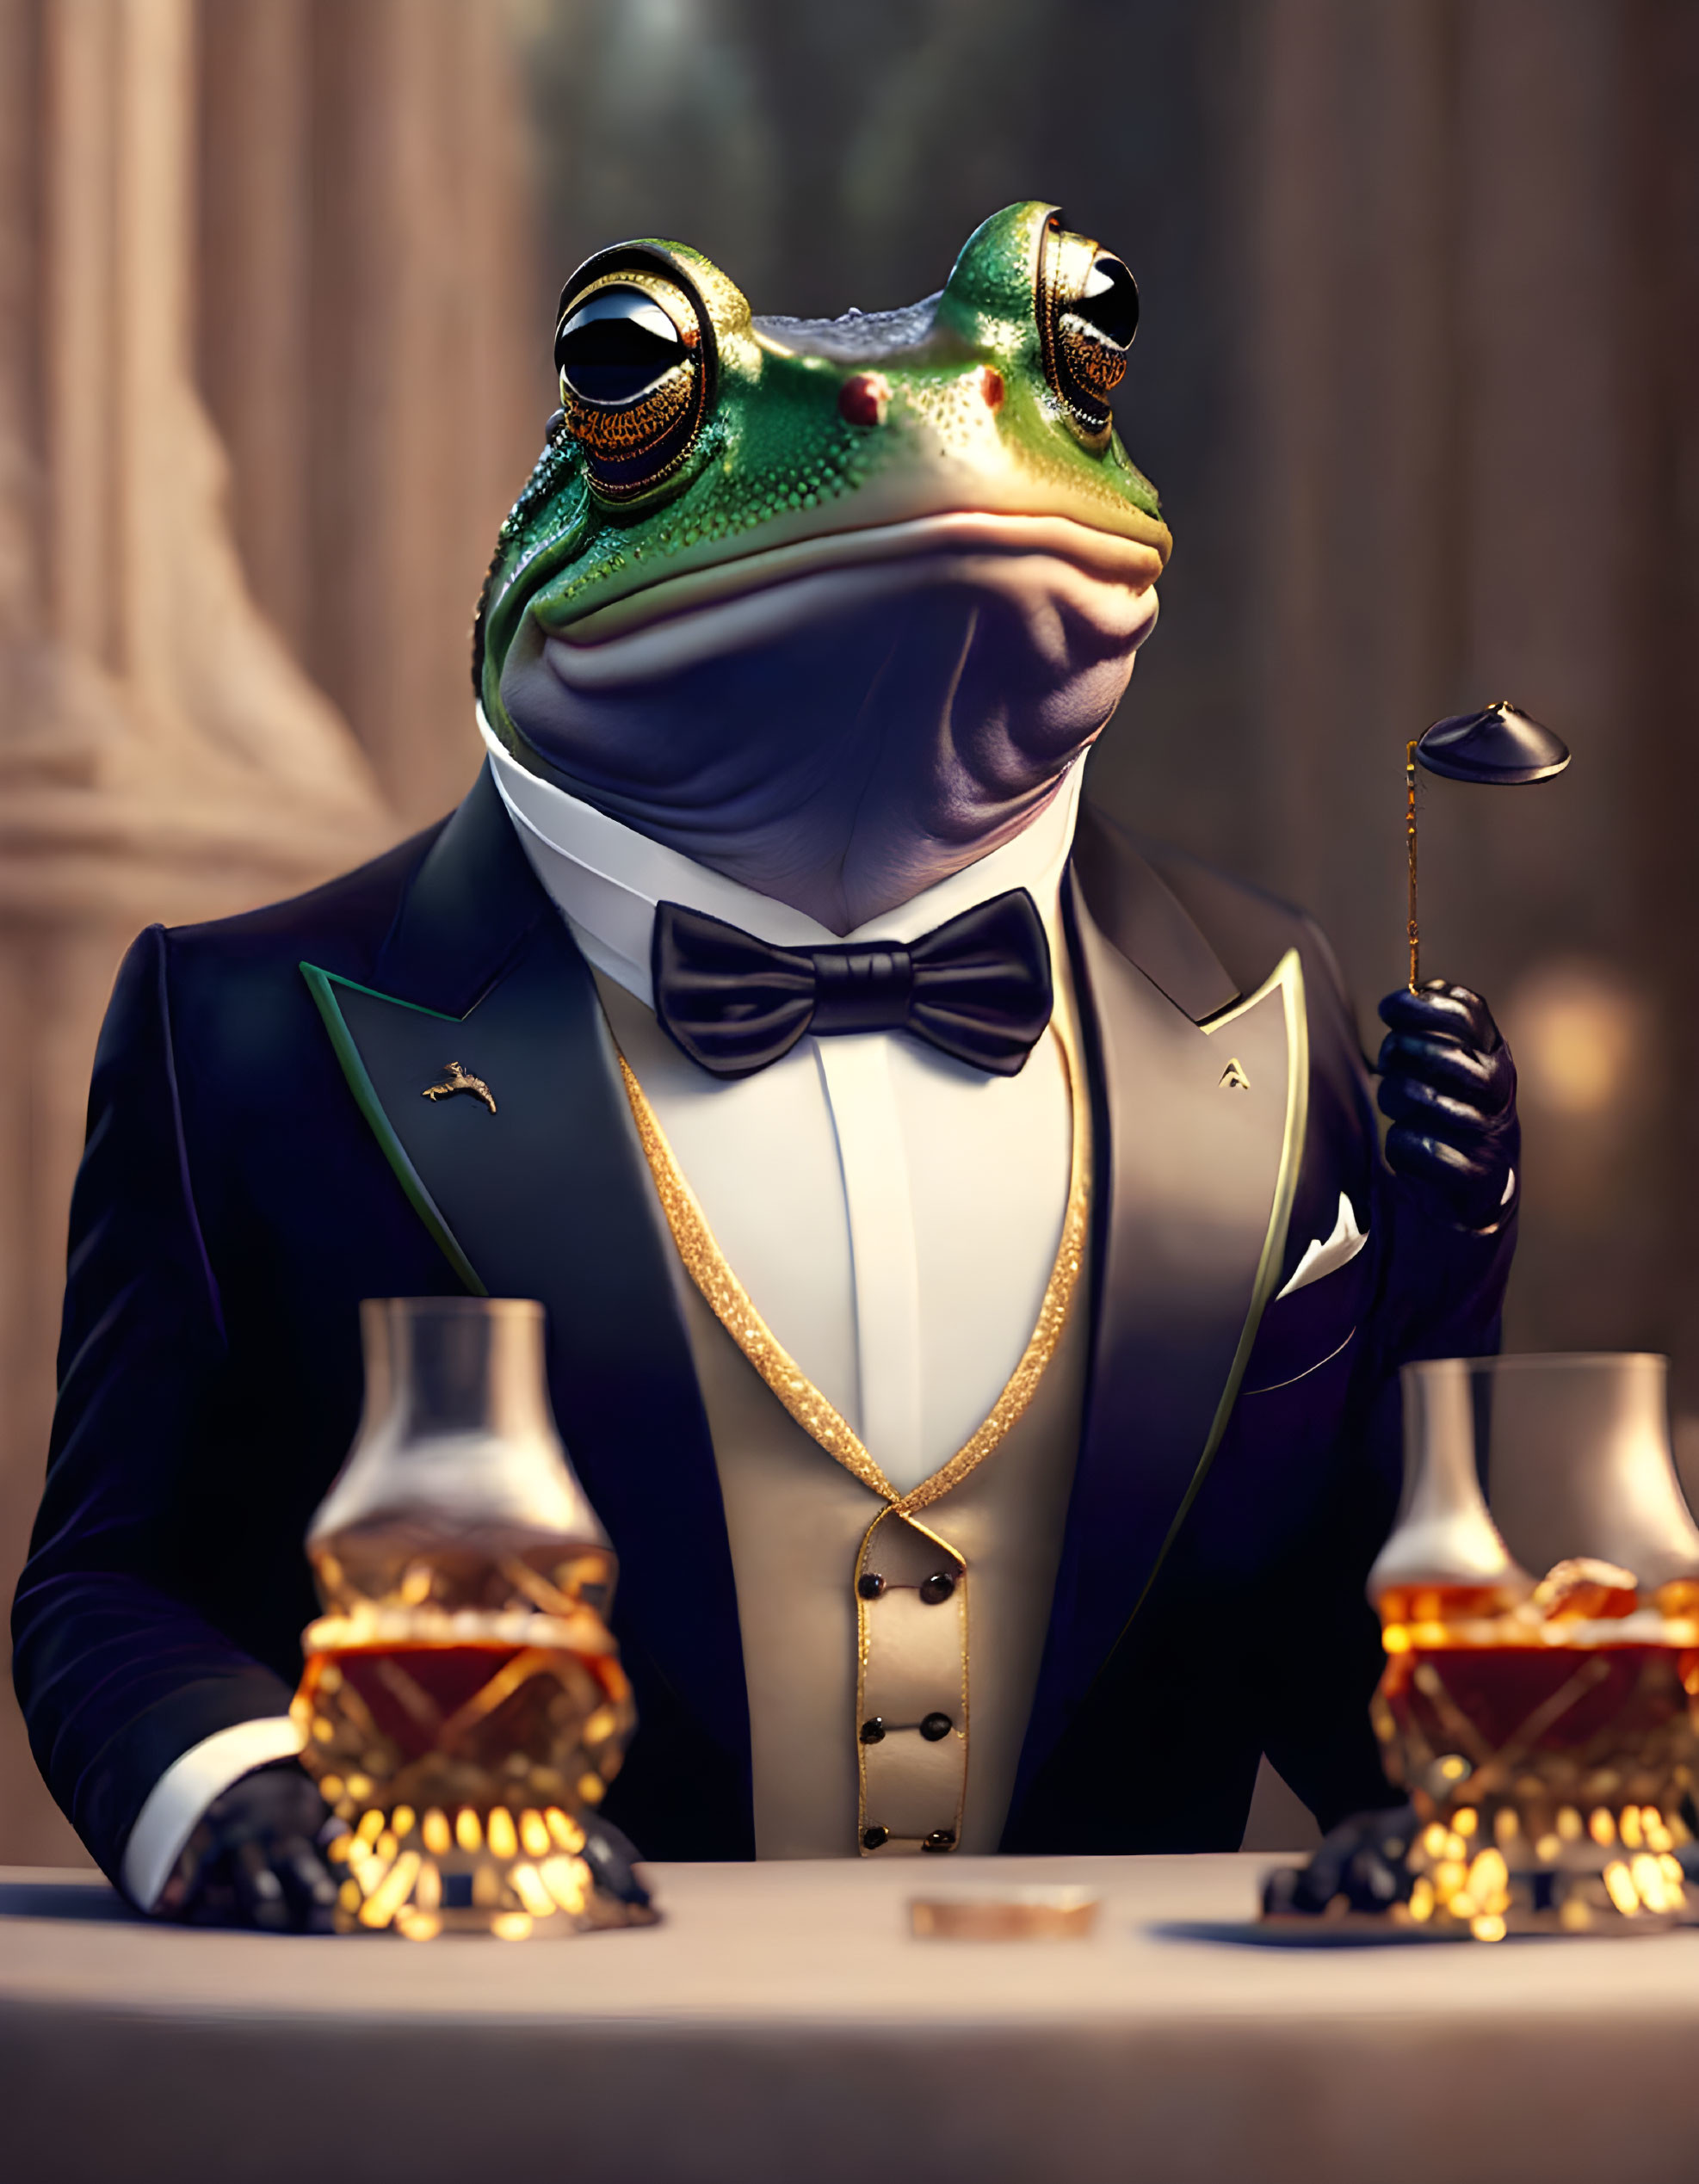 Anthropomorphic frog in tuxedo with monocle and cane at whiskey table